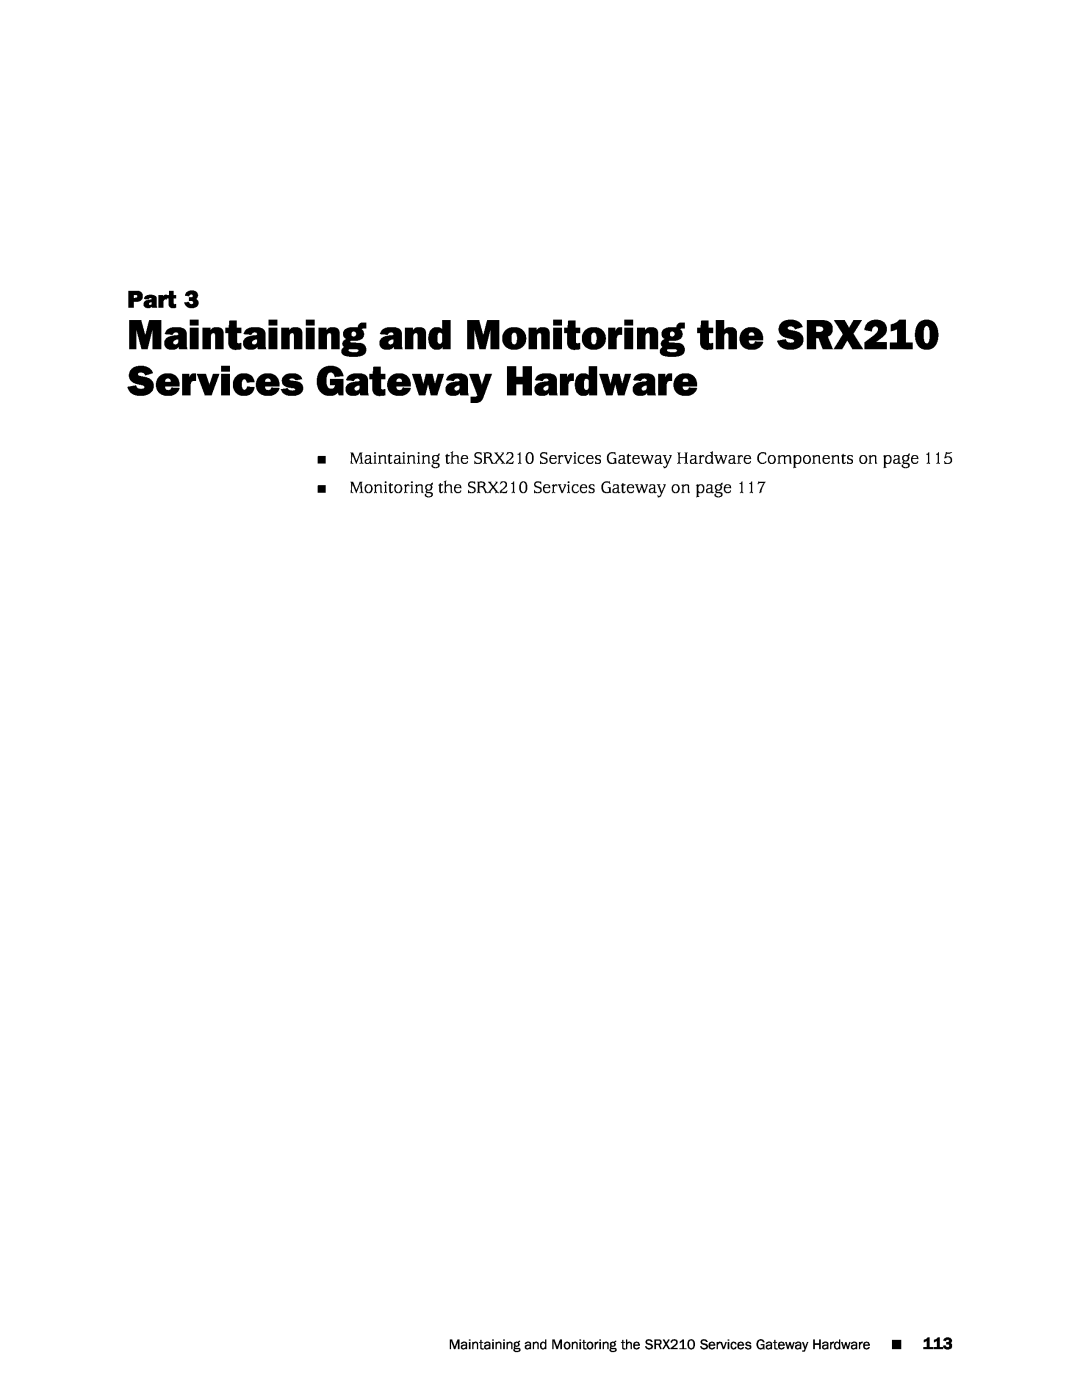 Juniper Networks SRX 210 manual Maintaining and Monitoring the SRX210 Services Gateway Hardware, Part 